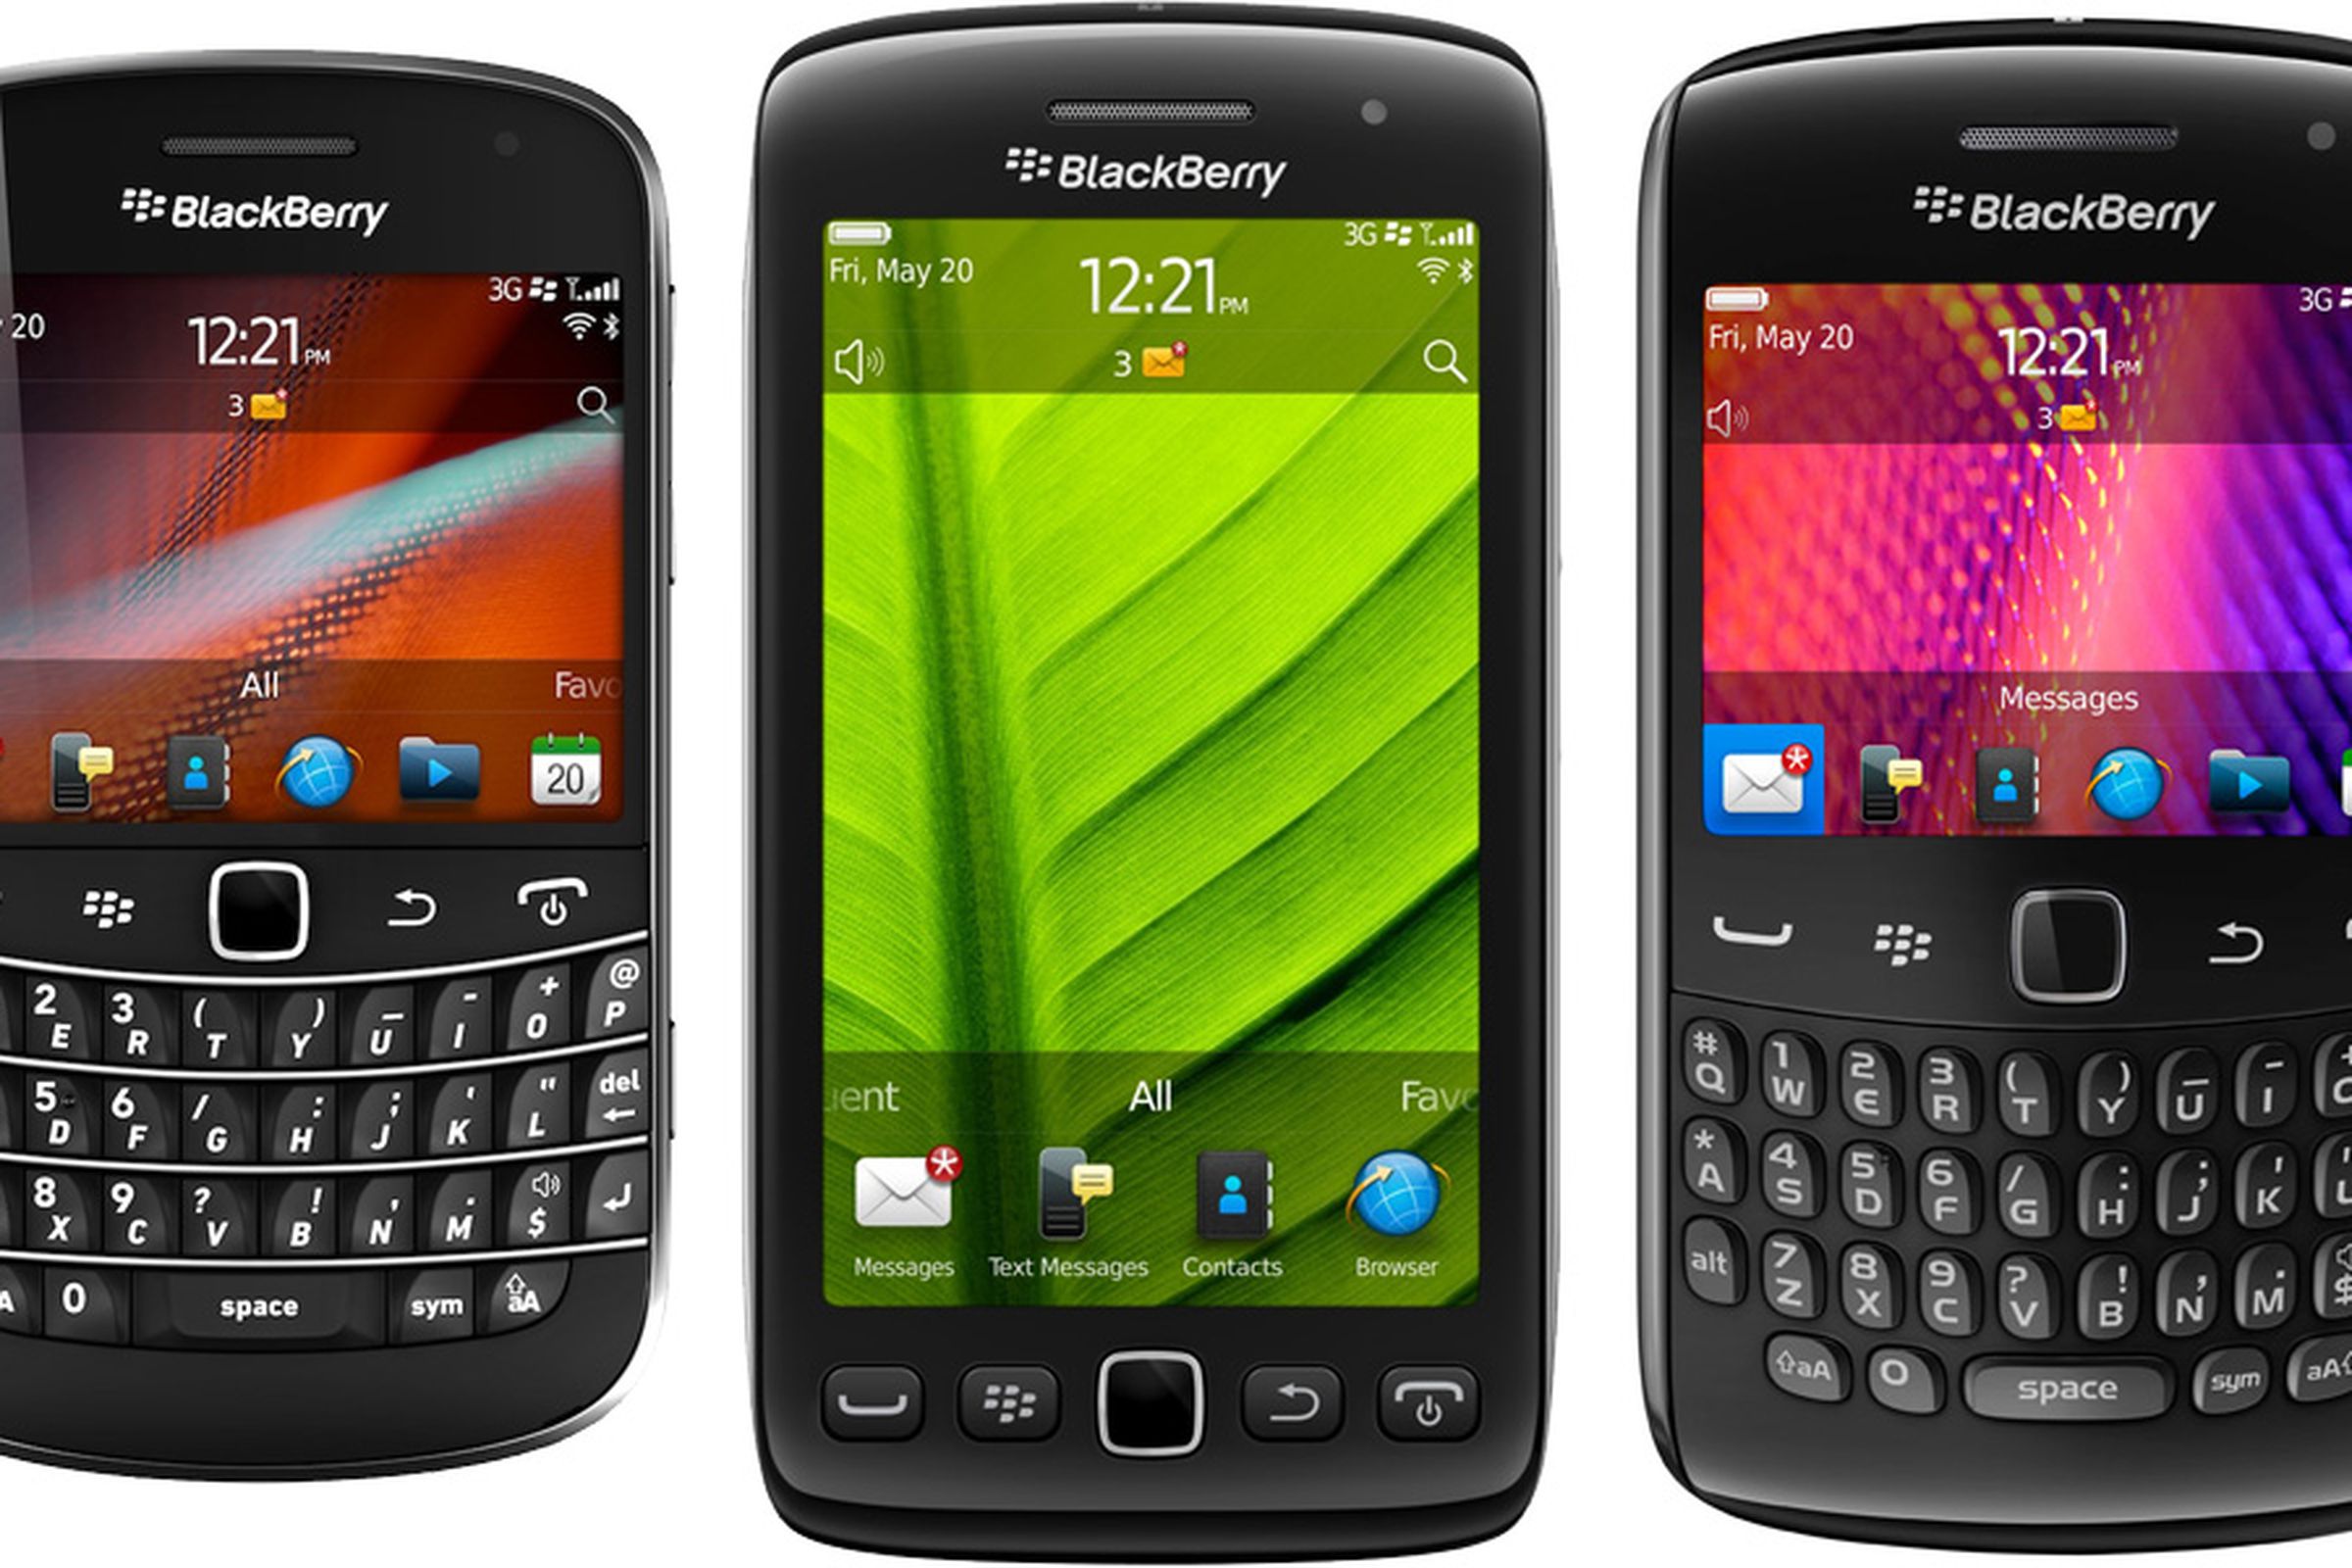 BlackBerry Bold 9900, Torch 9860, and Curve 9360